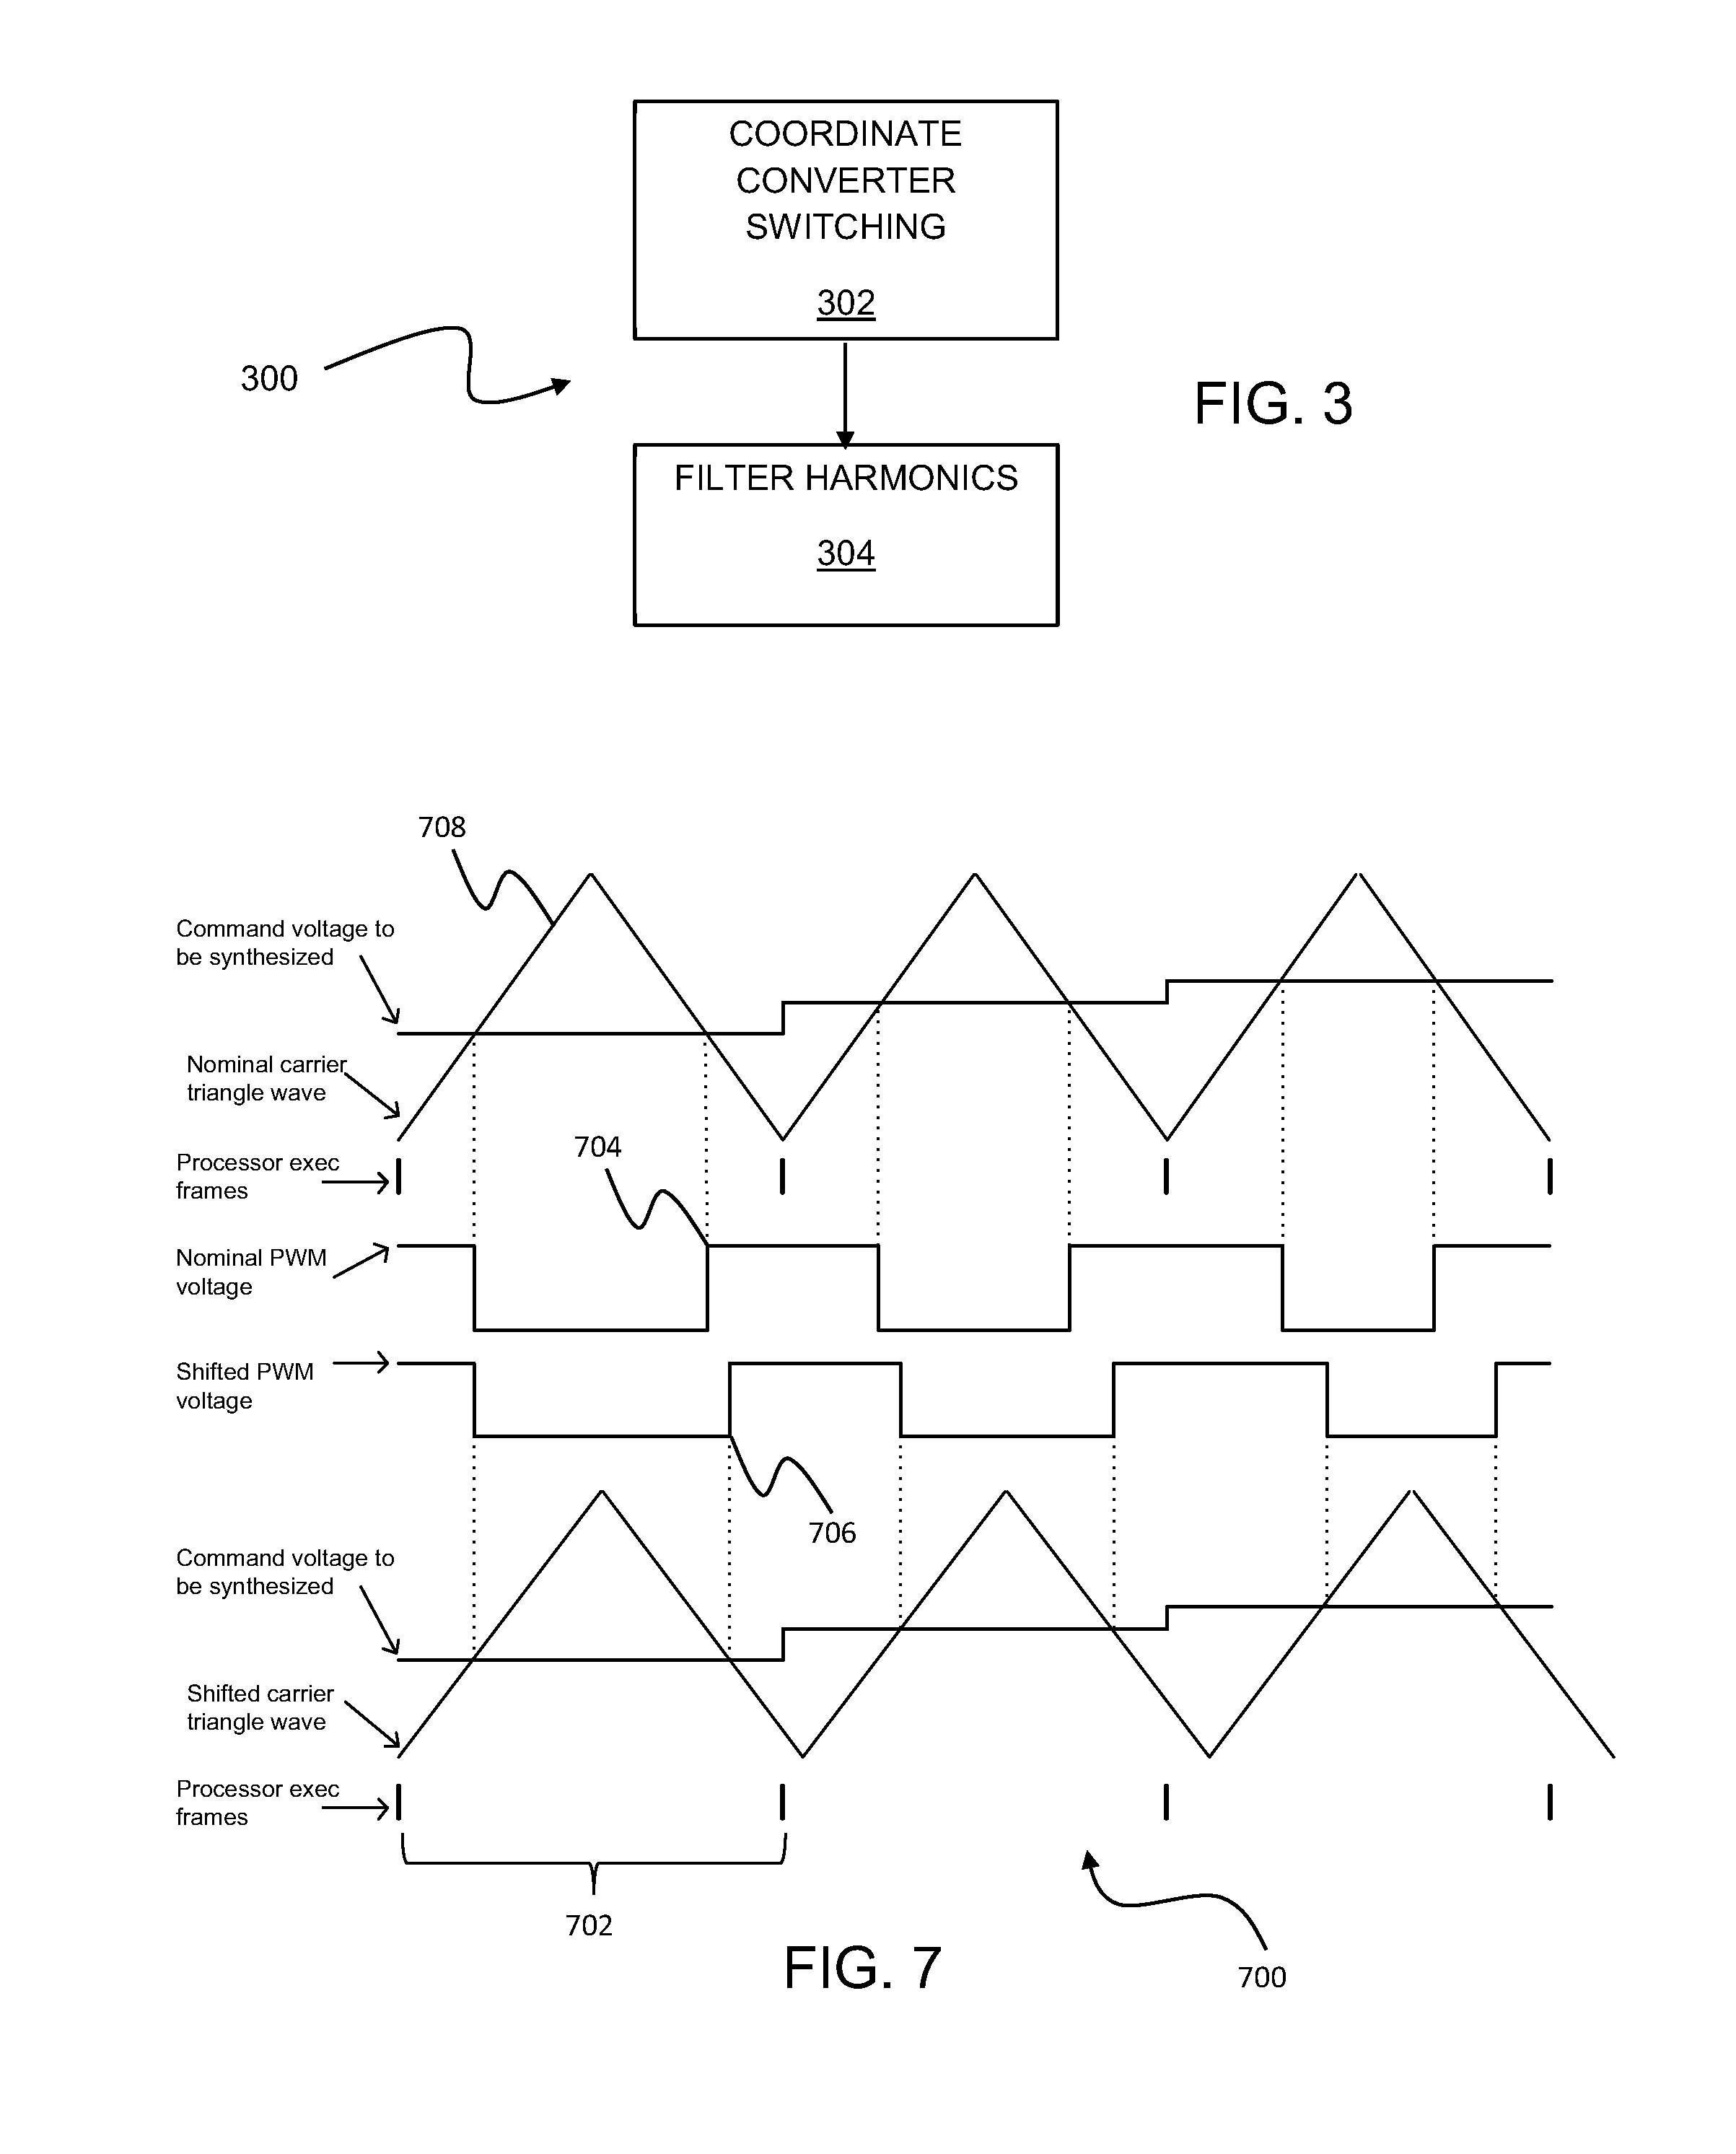 Method and system for controlling switching frequency of a doubly-fed induction generator (DFIG)